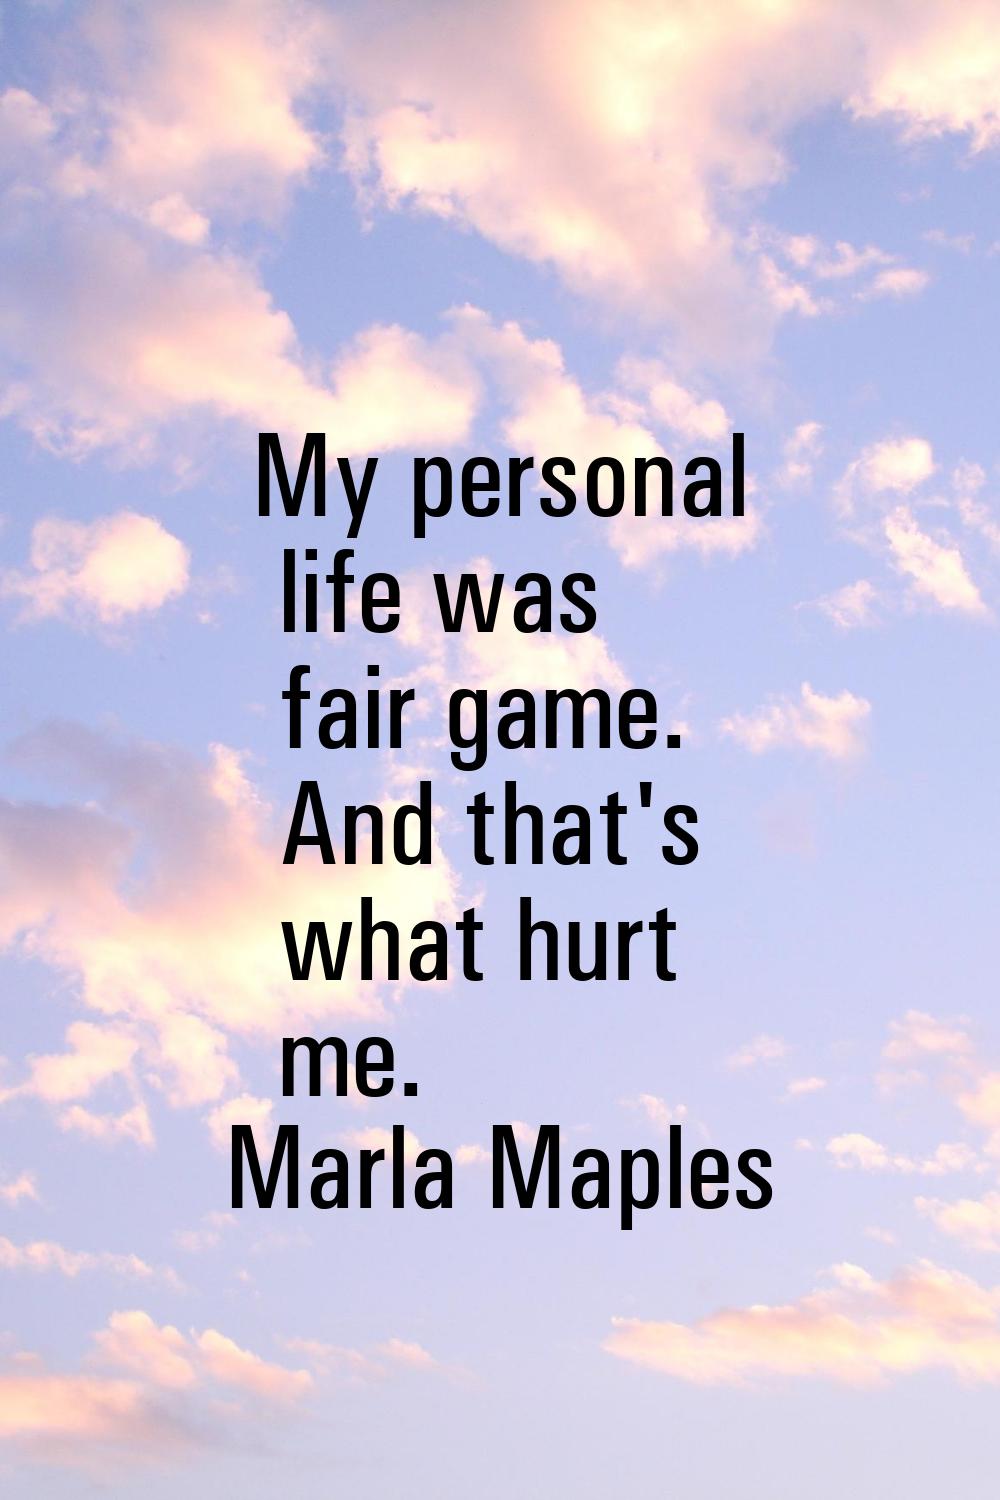 My personal life was fair game. And that's what hurt me.